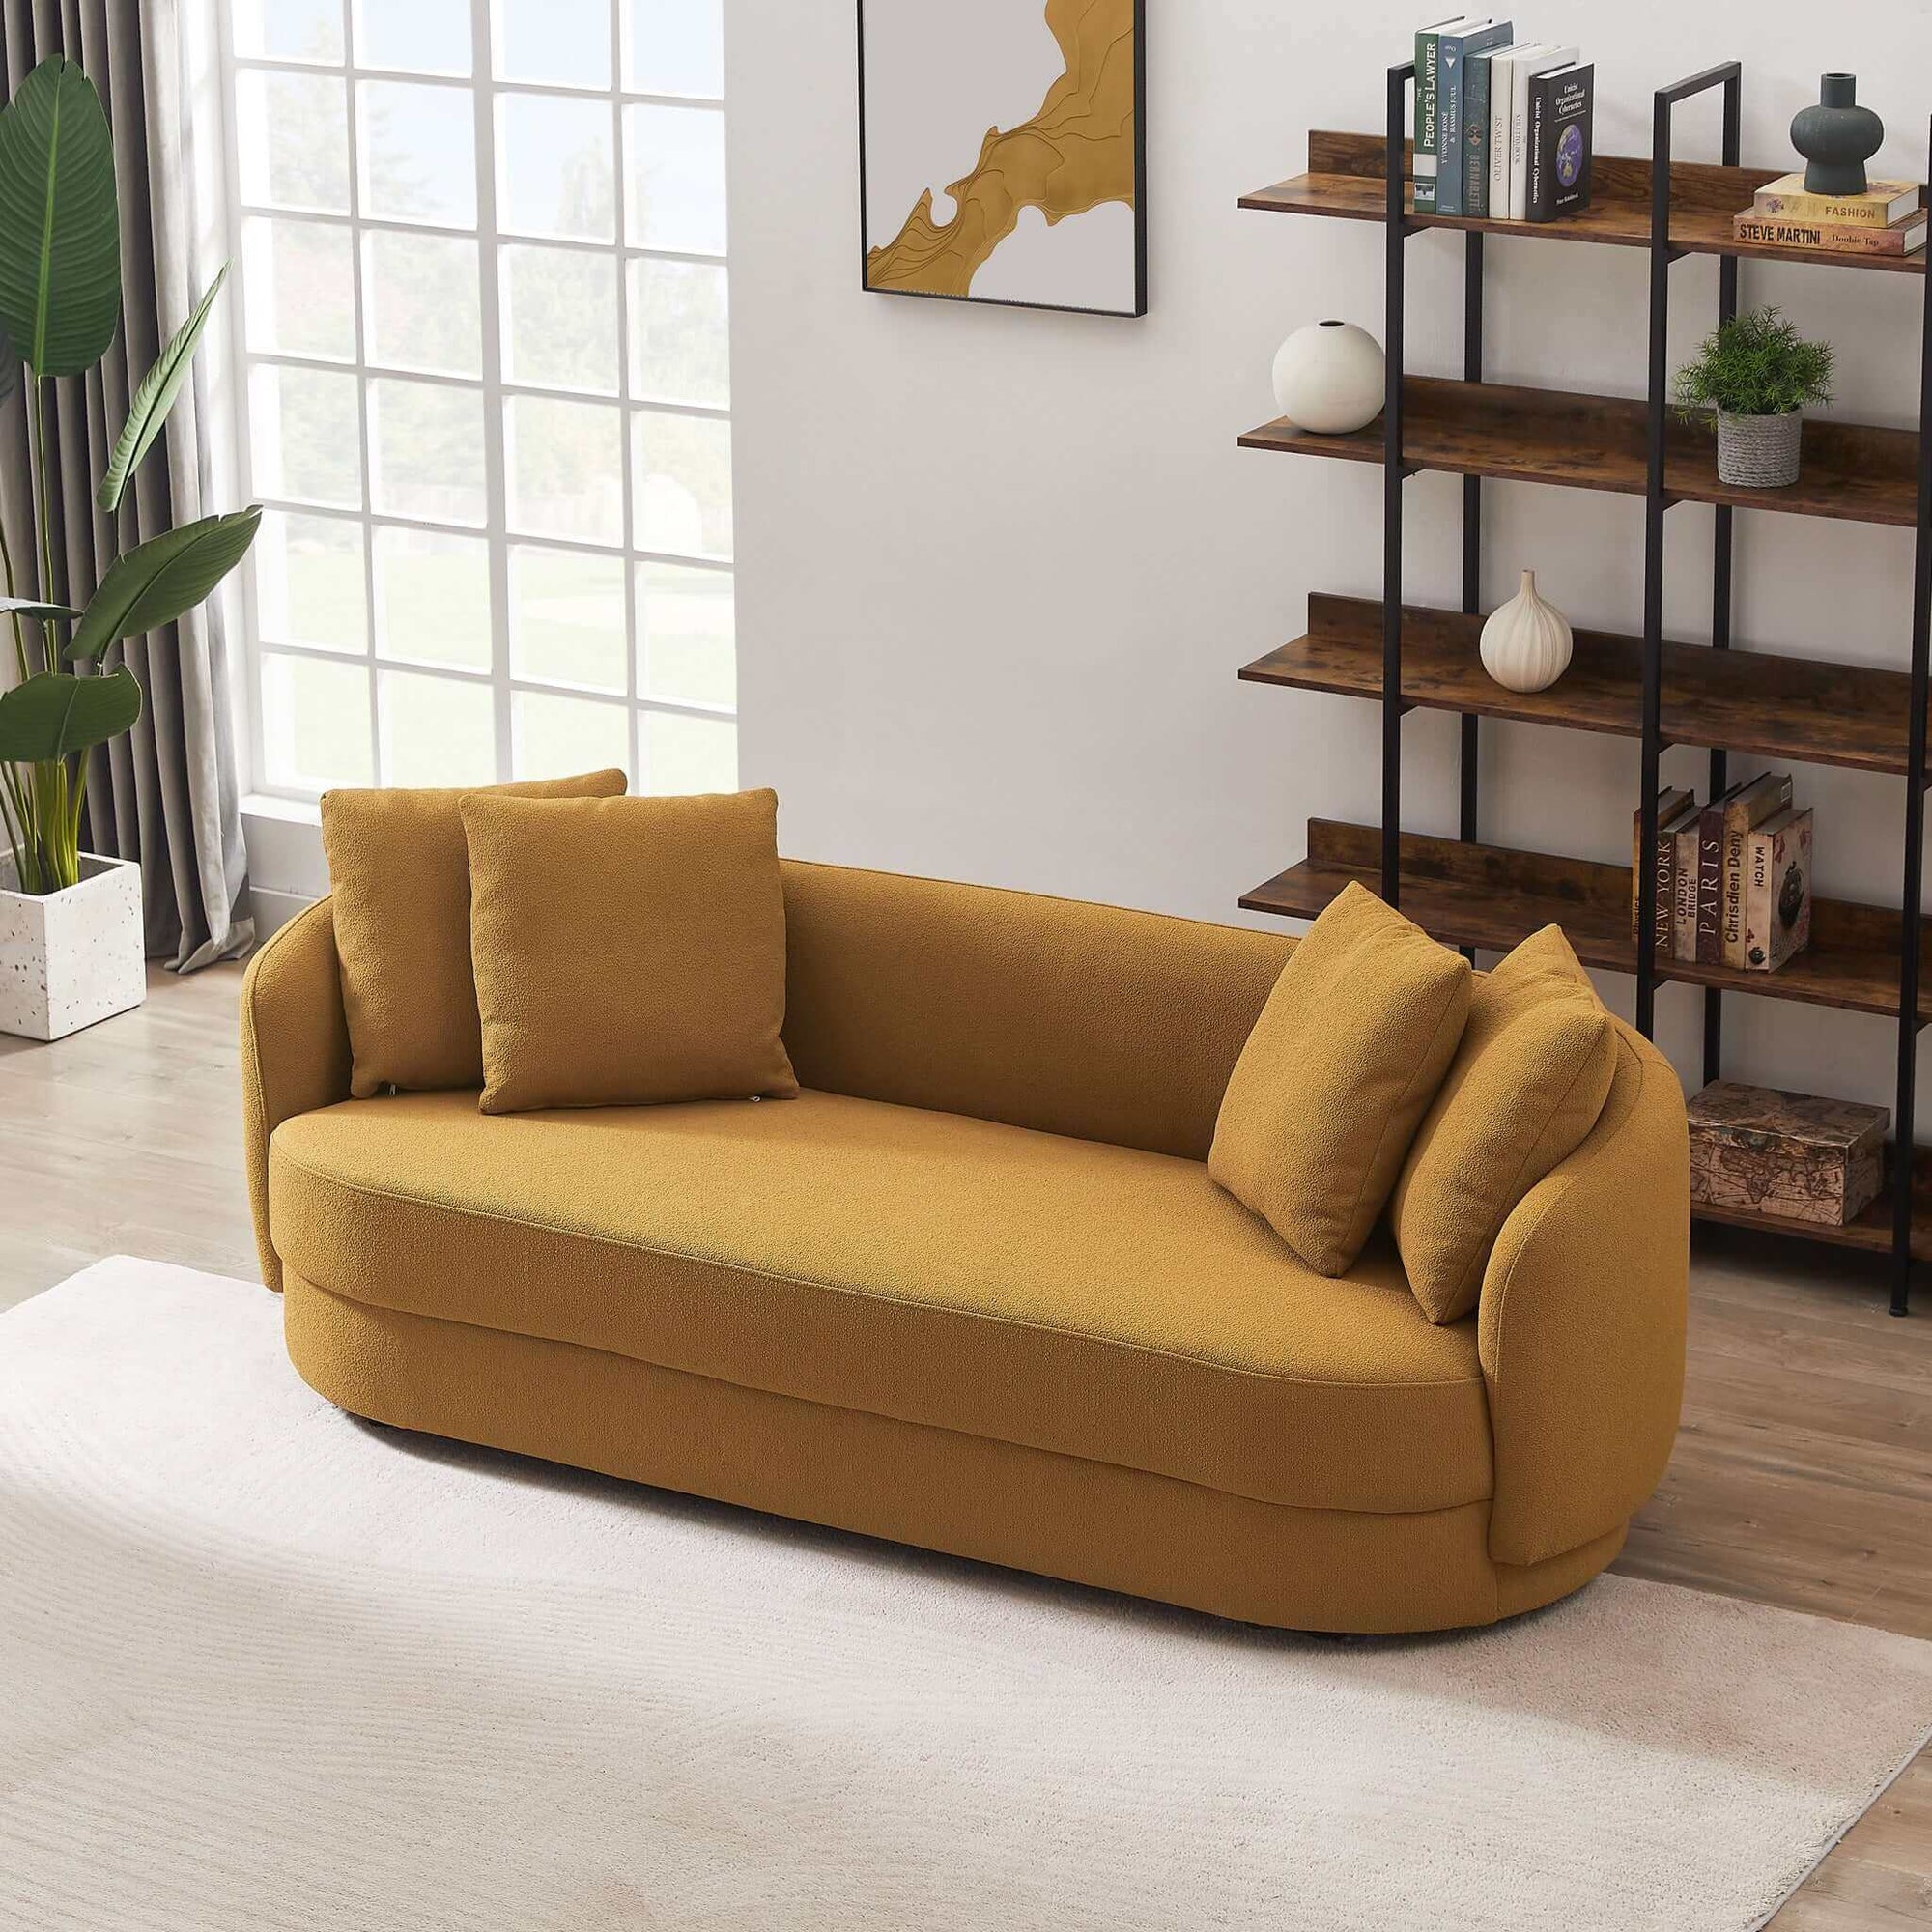 Ashcroft Imports Dylan Modern French Boucle Sofa